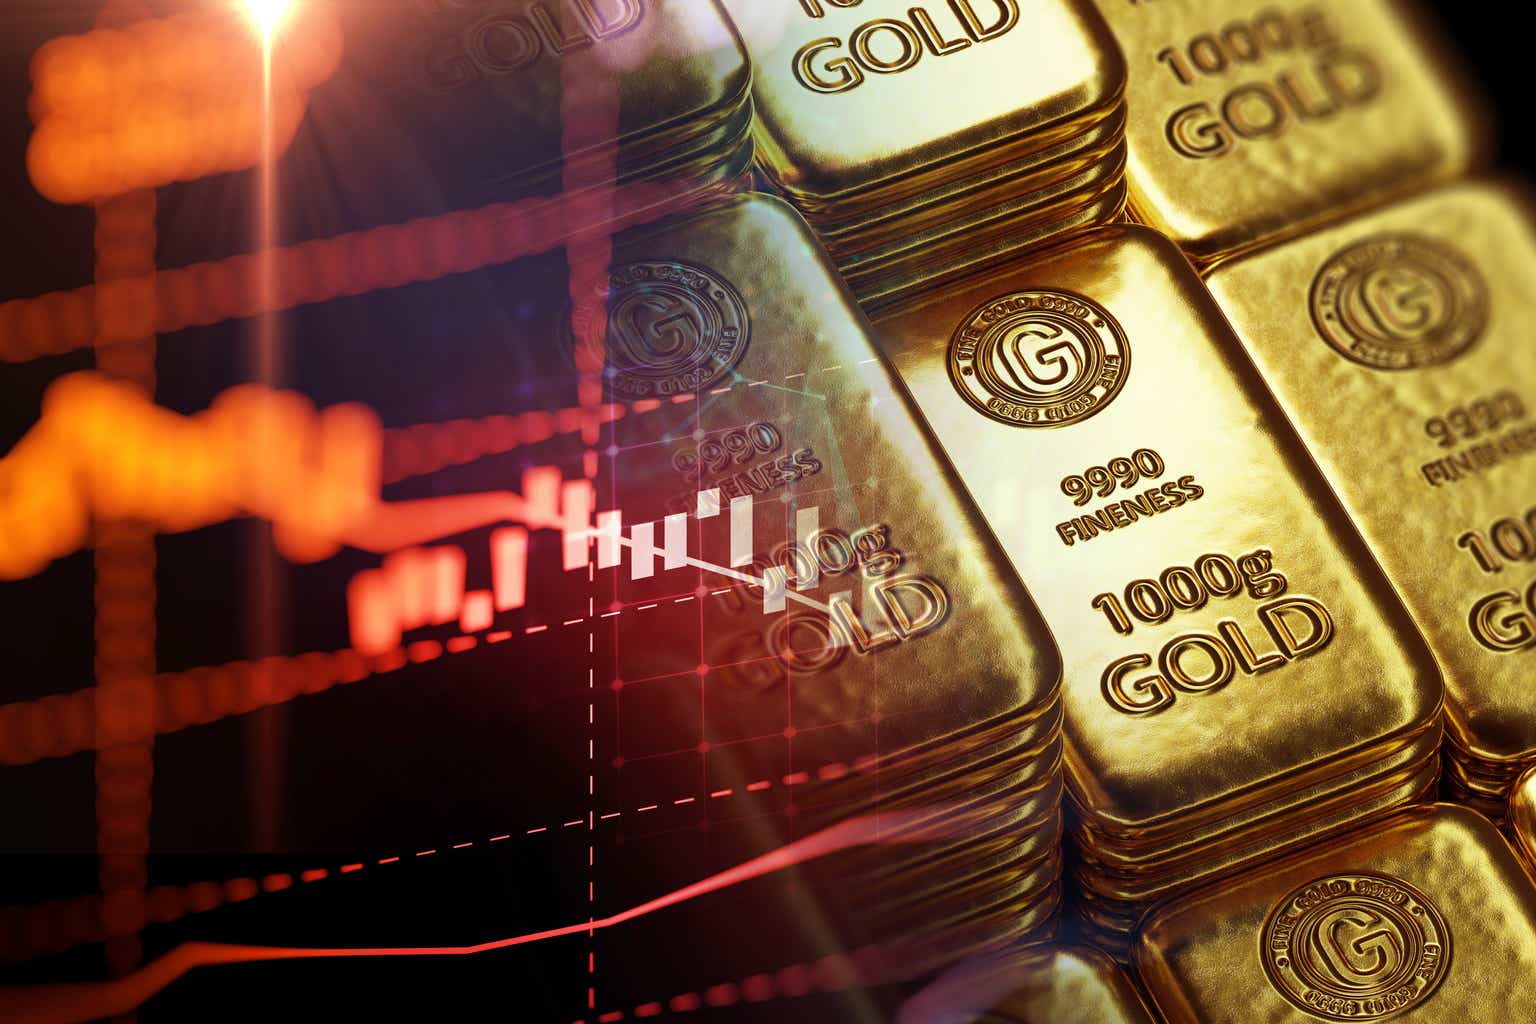 Seabridge Is Poised For A Strong Recovery With Bullish Gold Prices